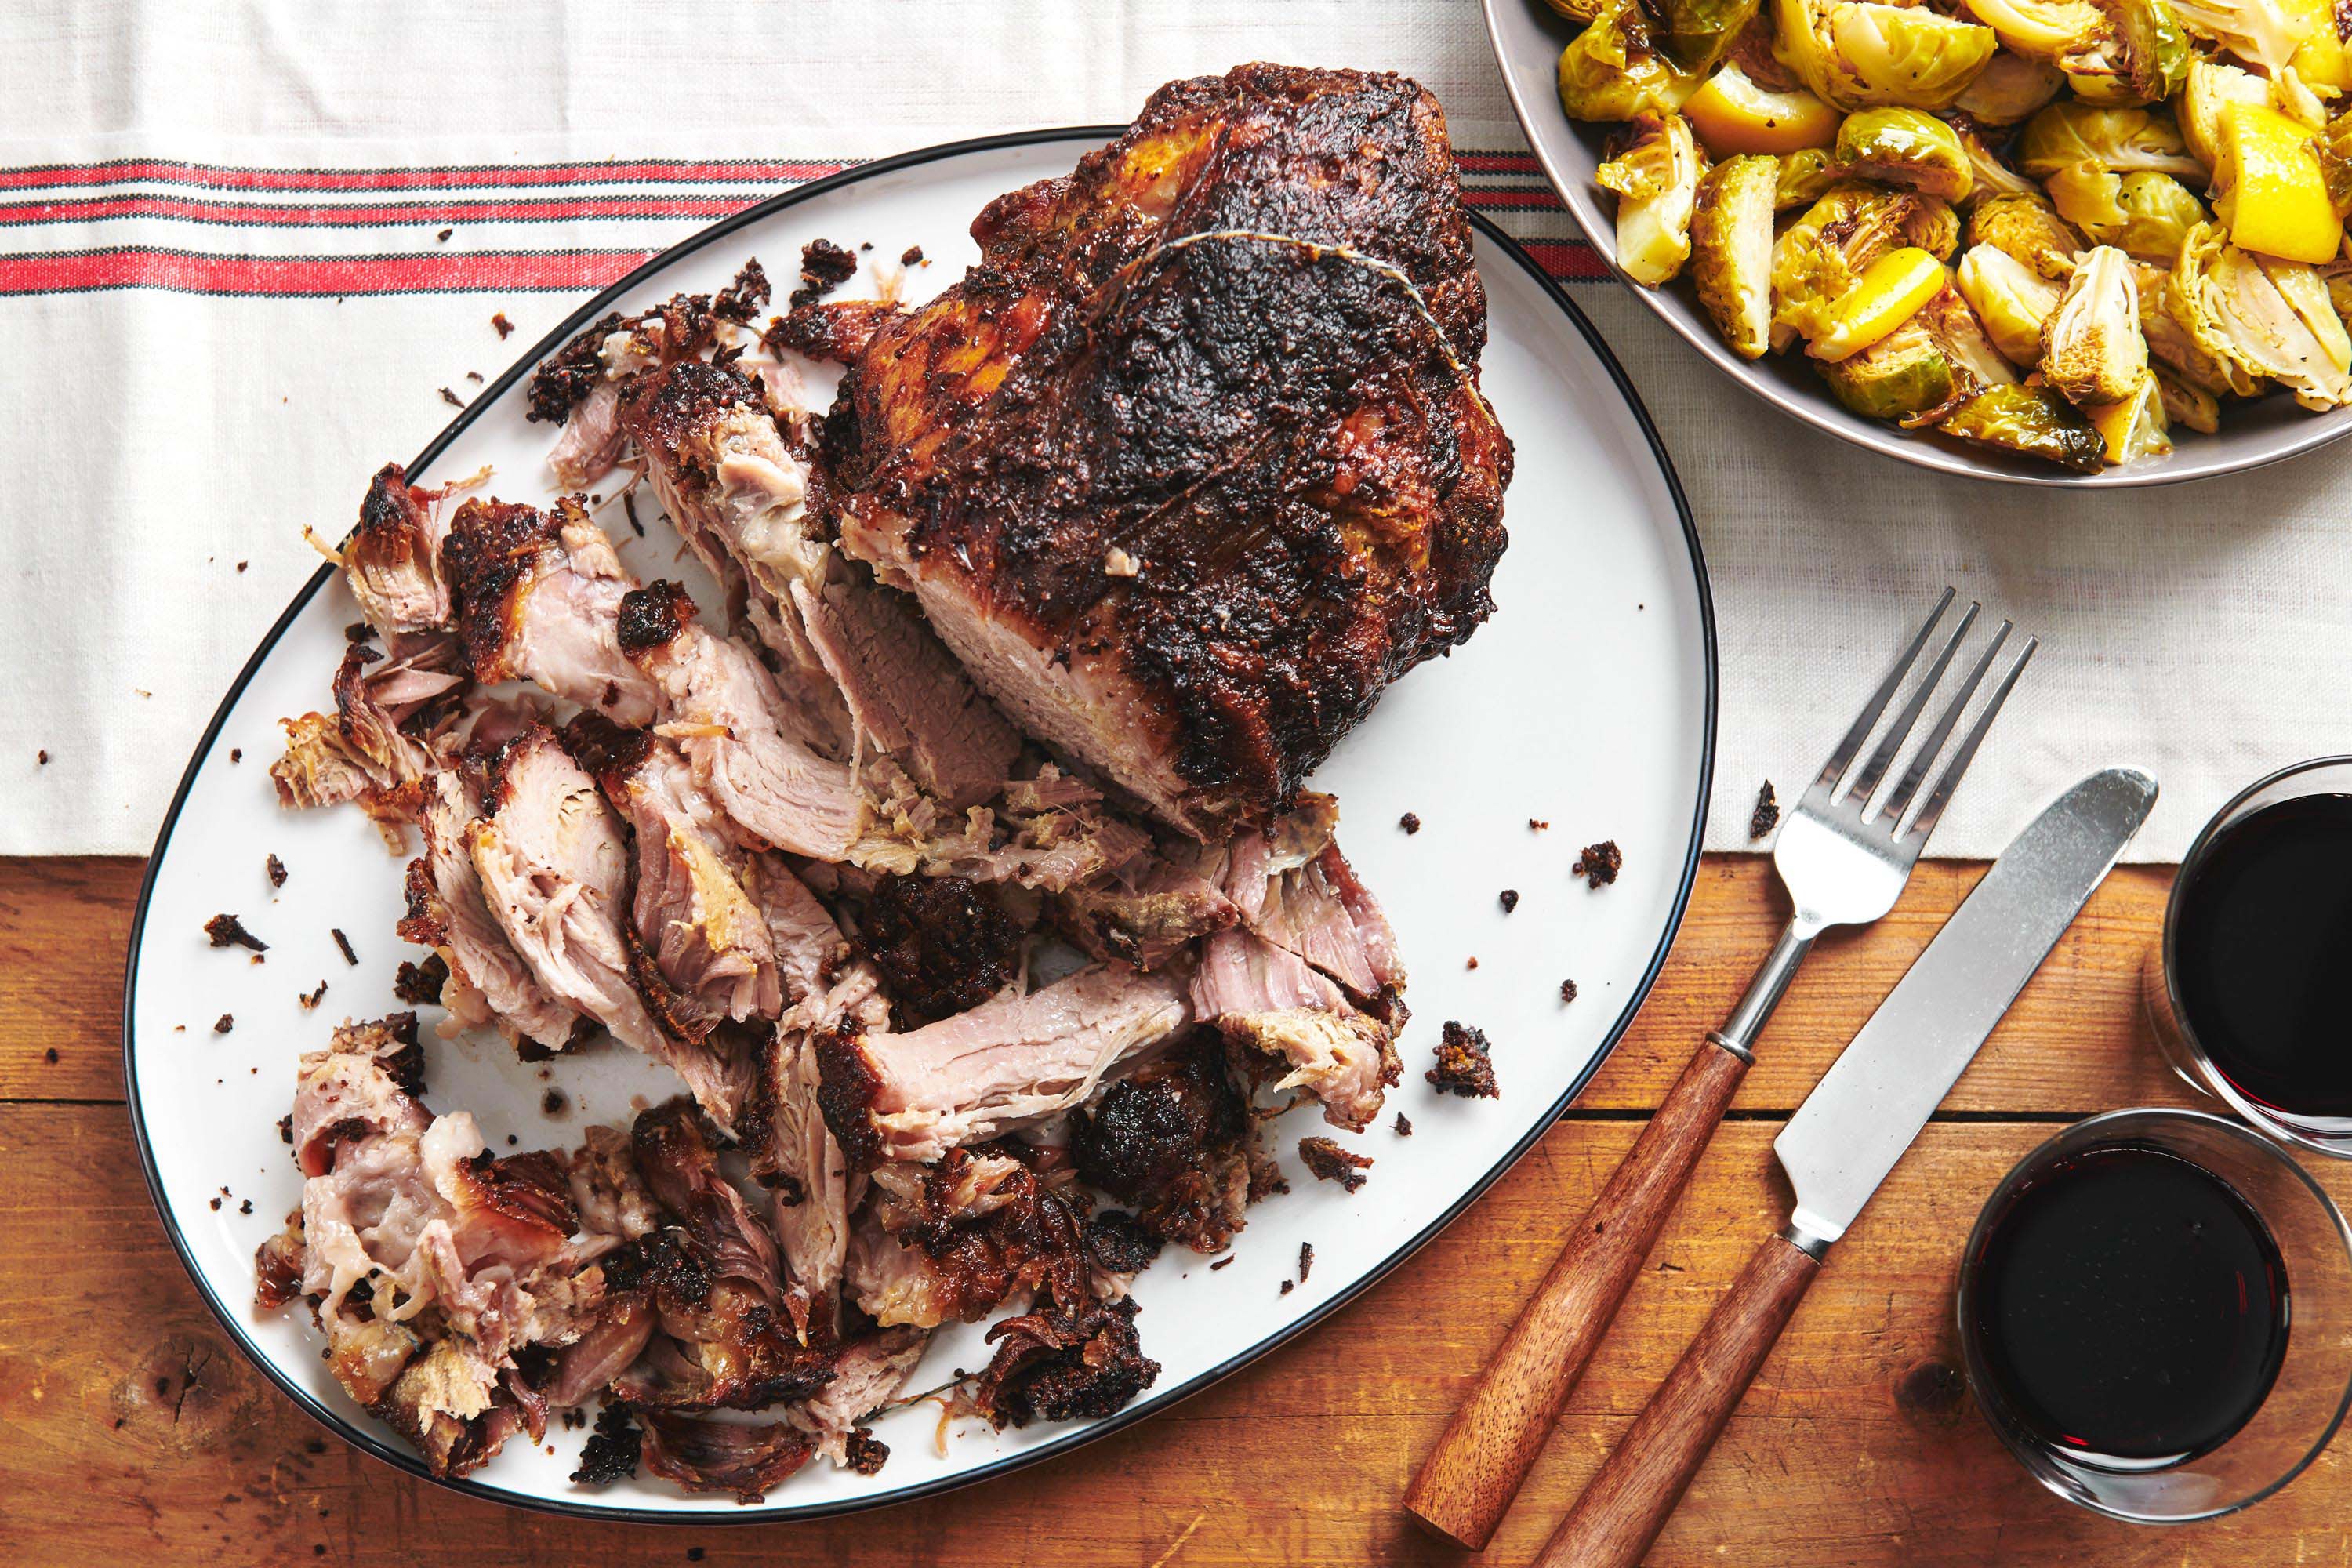 Sliced Fall-Apart Roasted Pork Shoulder with Rosemary, Mustard and Garlic on serving plate.